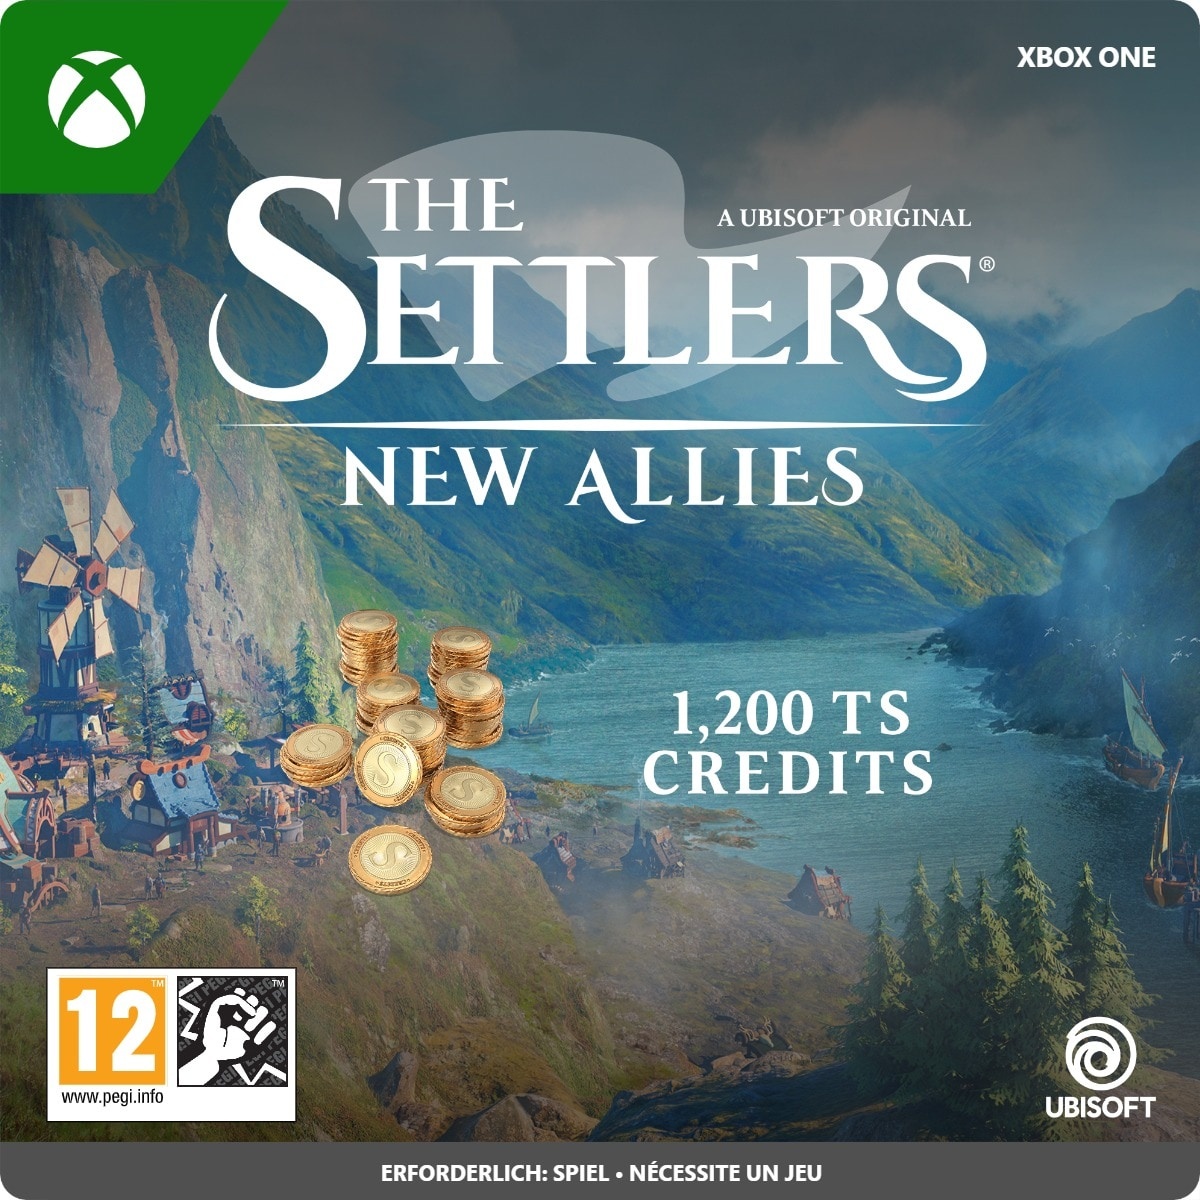 Xbox The Settlers New Allies Virtual Currency 1200 Credits Download Code (Xbox) zum Sofortdownload